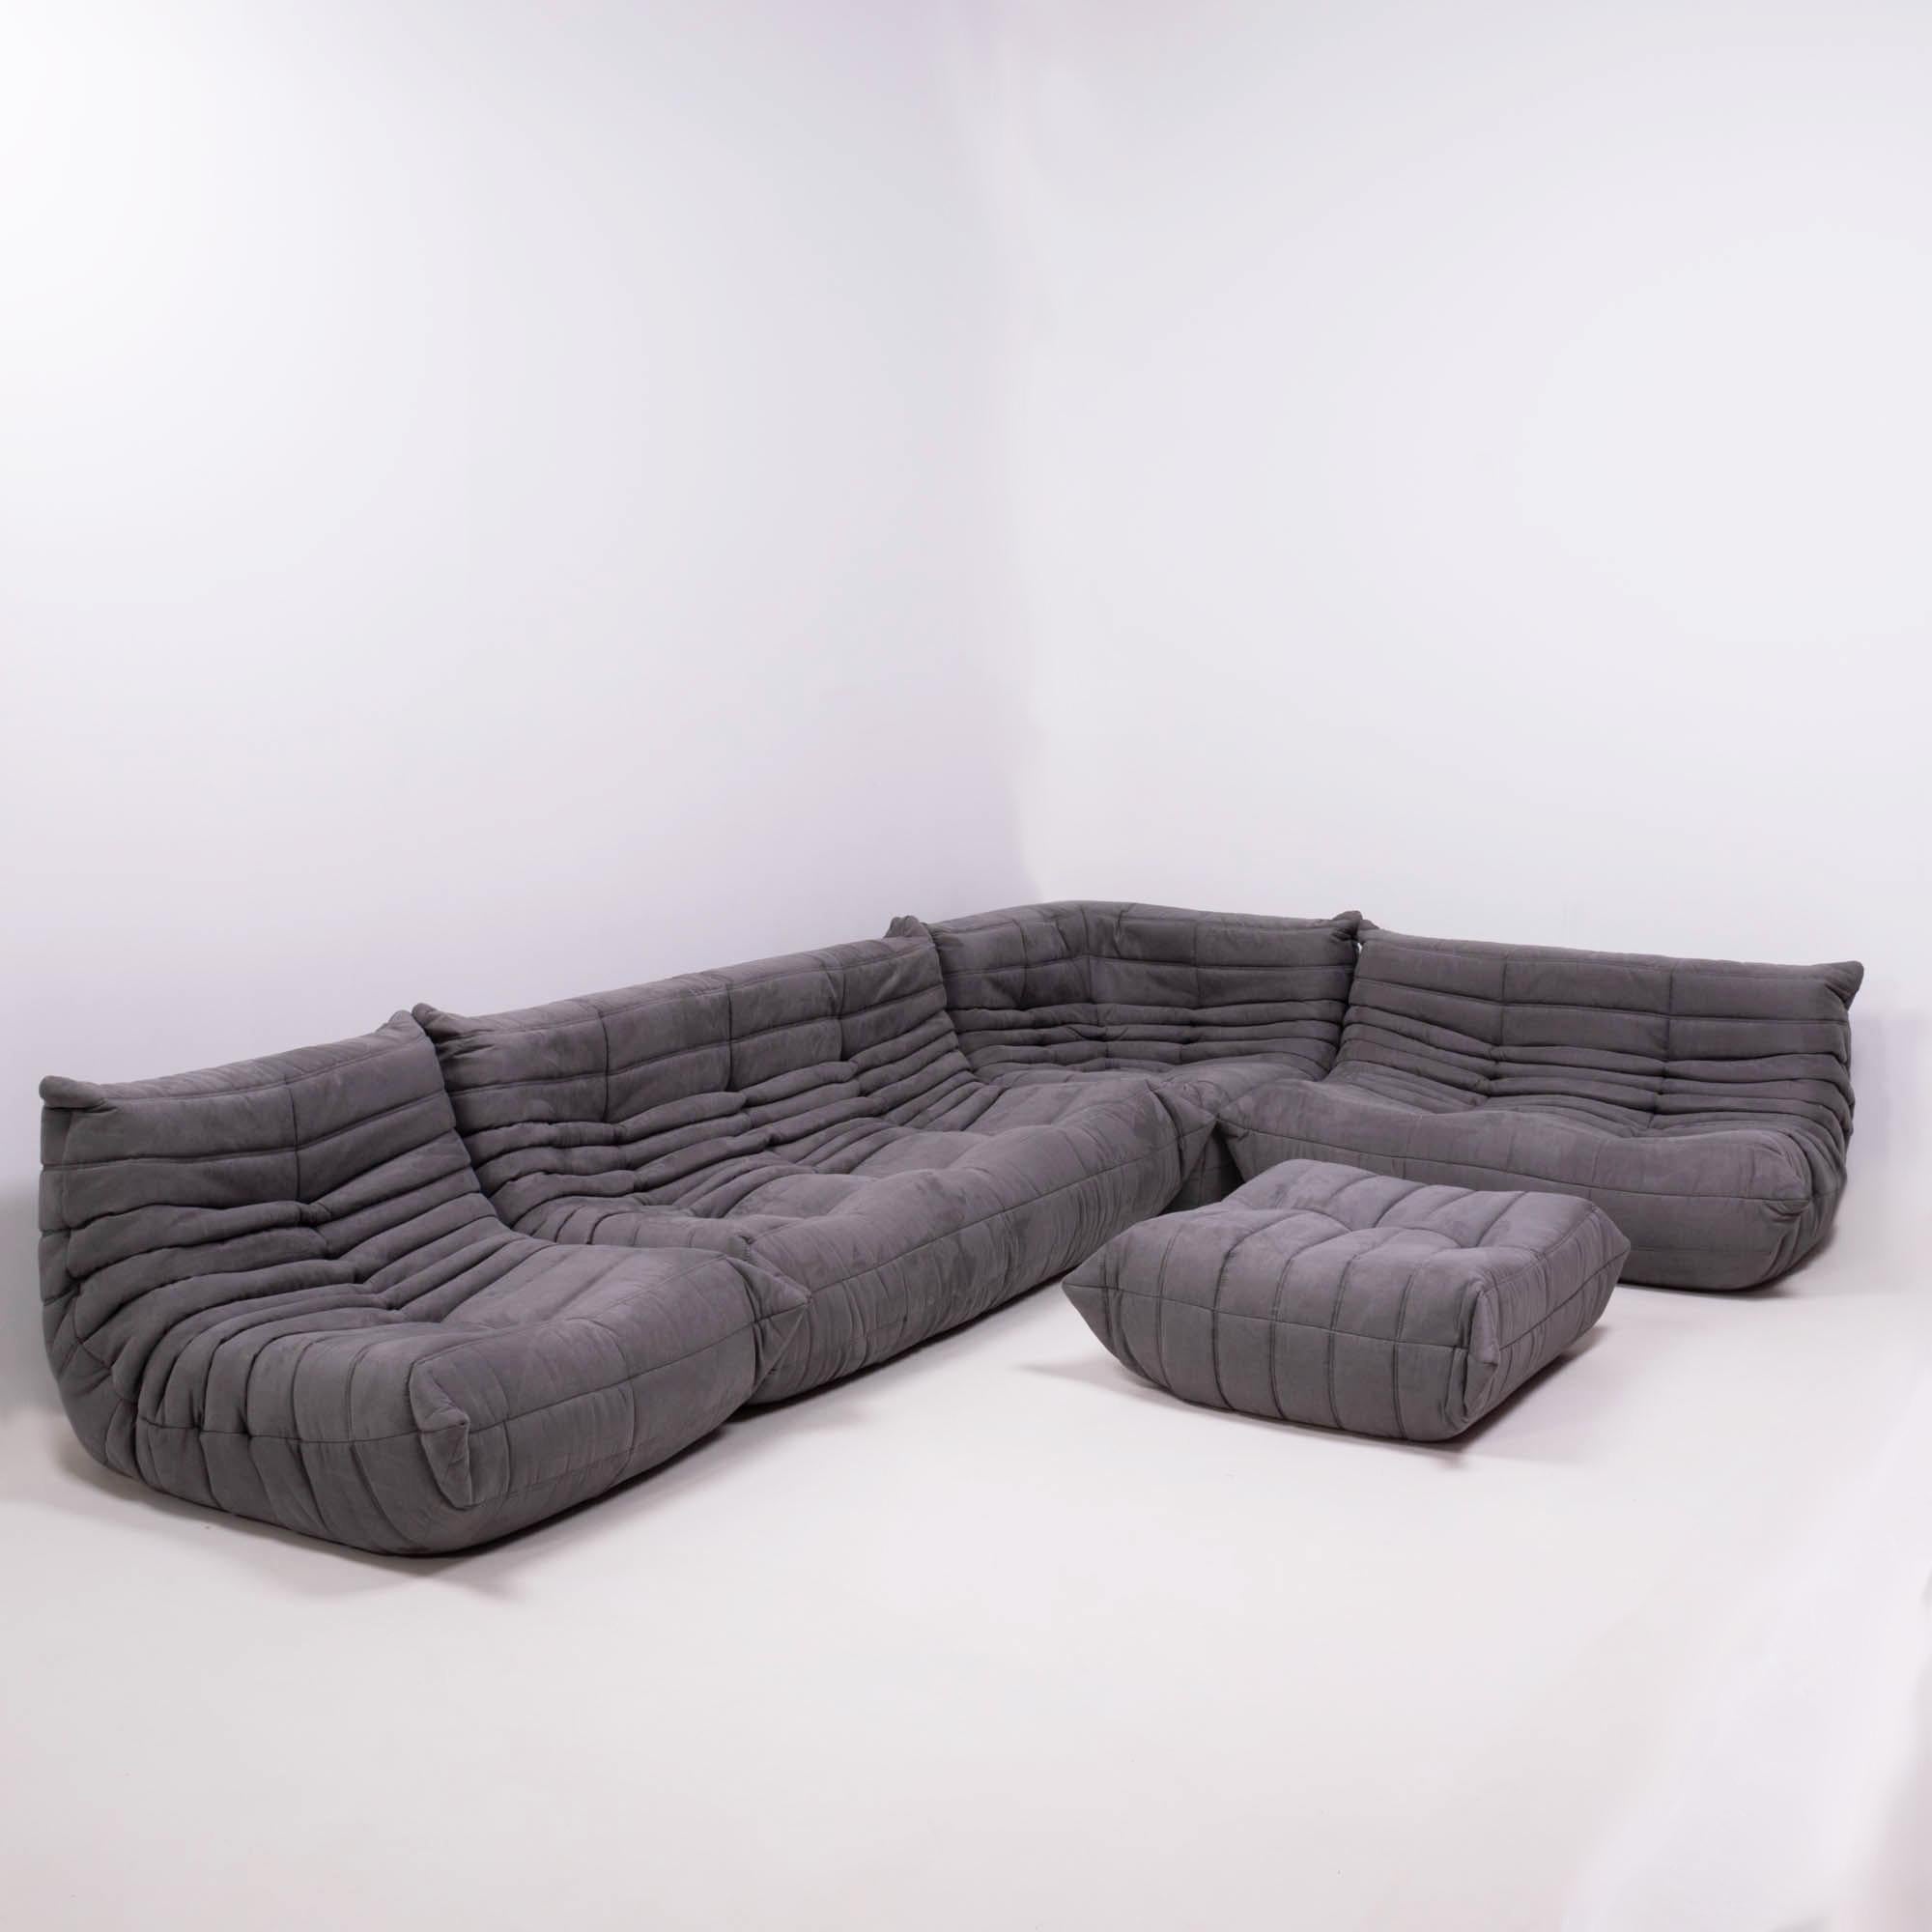 The iconic Togo sofa, originally designed by Michel Ducaroy for Ligne Roset in 1973 has become a design Classic.

This five piece modular set is incredibly versatile and can be configured into one large corner sofa or split for a multitude of